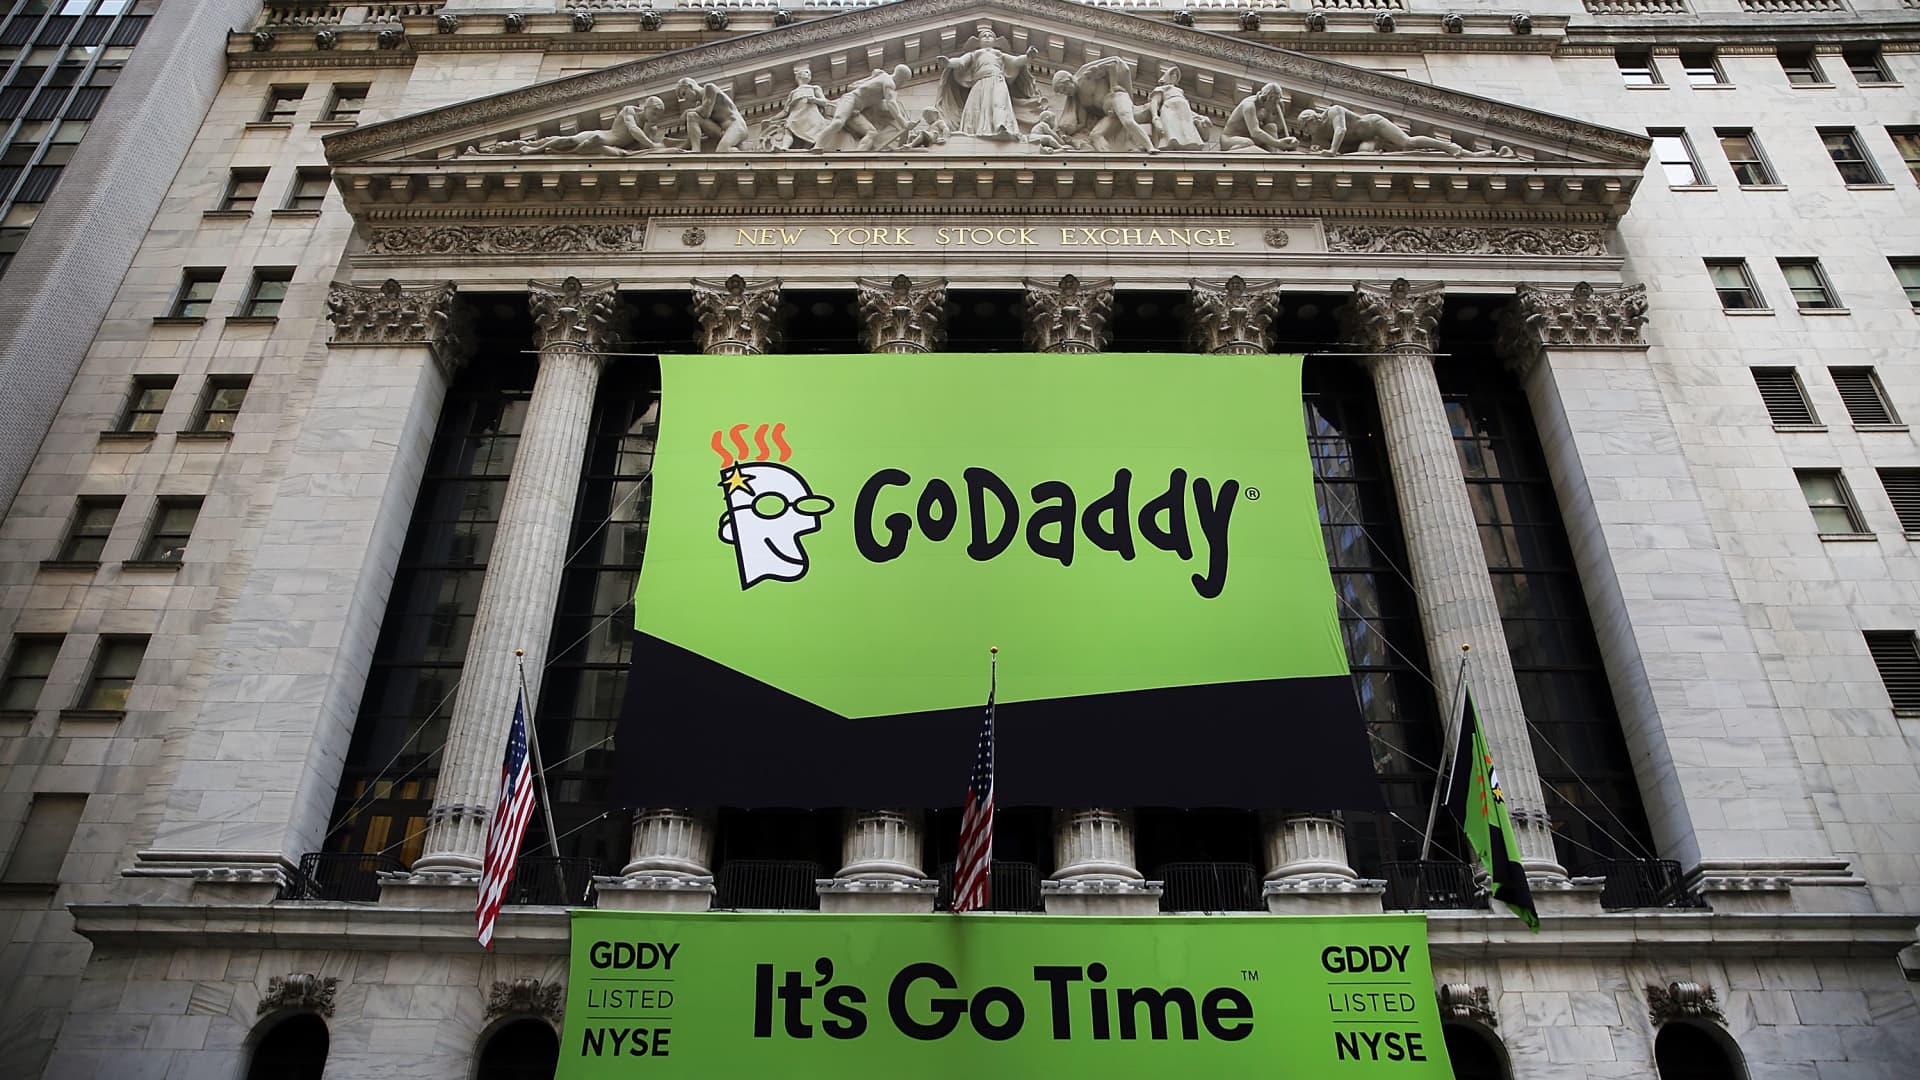 Starboard urges GoDaddy to set 'prudent' guidance and offer specifics on cost savings